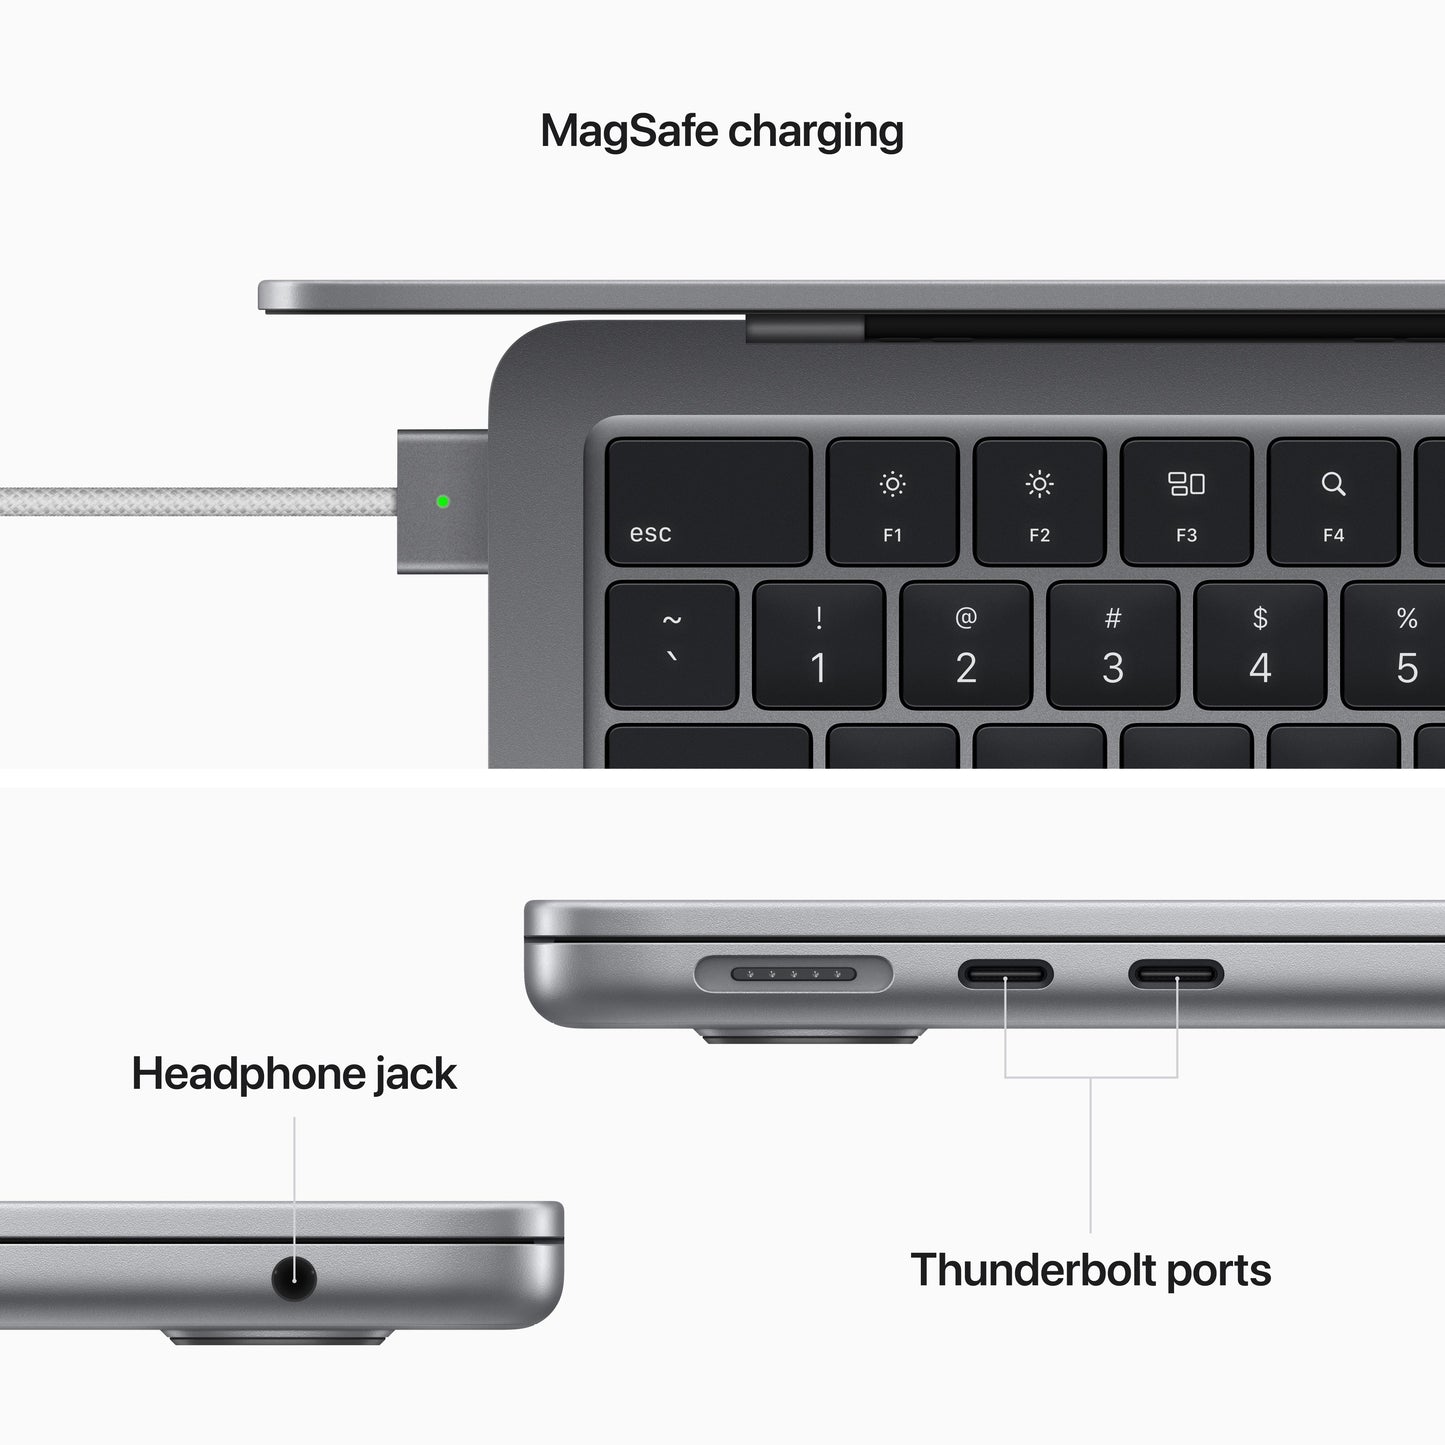 13-inch MacBook Air: Apple M2 chip with 8‑core CPU and 8‑core GPU, 256GB SSD - Space Grey